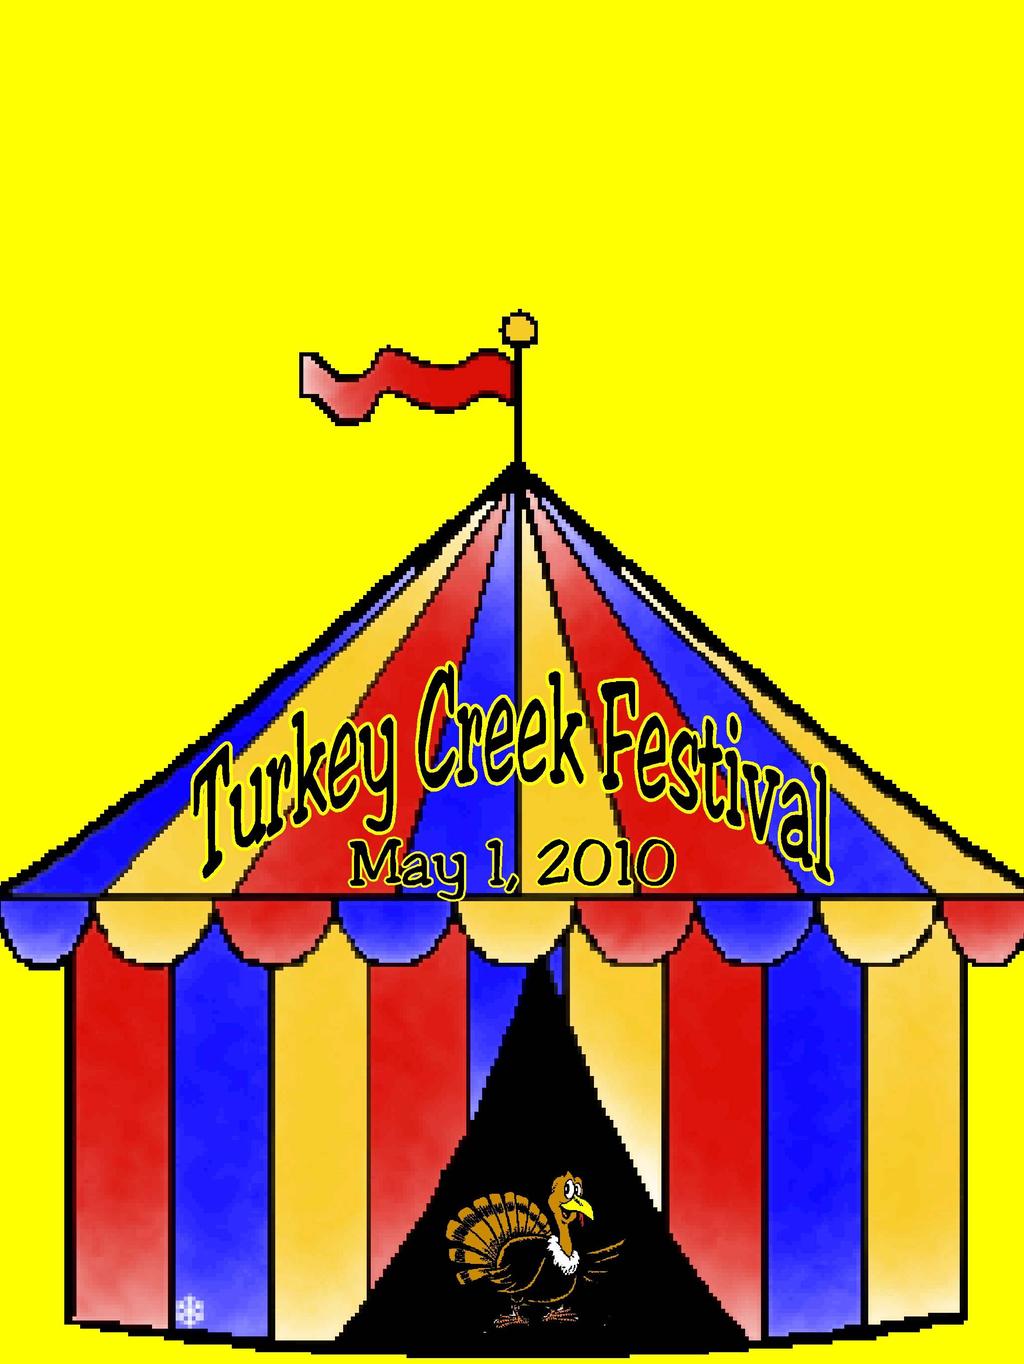 M a y 2 0 1 0 Blessings A p u b l i c a t i o n o f B y r o m v i l l e B a p t i s t C h u r c h In This Issue Ecclesiology & growth.. p. 2 Turkey Creek Fesitval.. p. 3 Assn l news........... p. 3 National Day of Pryer.